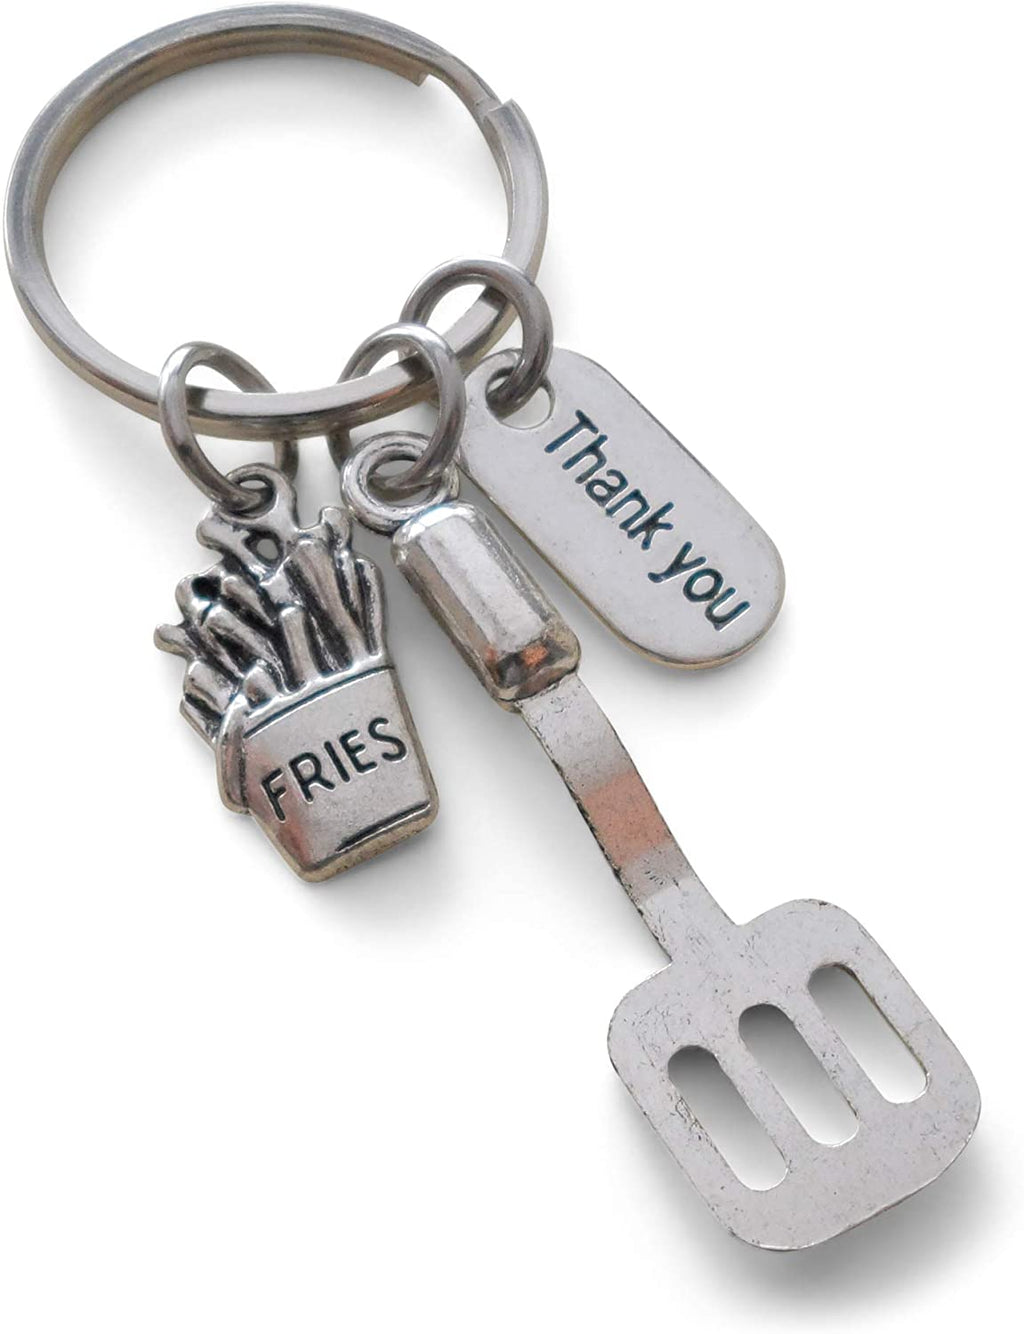 French Fries and Spatula Keychain, Fast Food Employee Appreciation Gift, Gift for Cooking Staff, Restaurant Team Gift, Thank You Gift